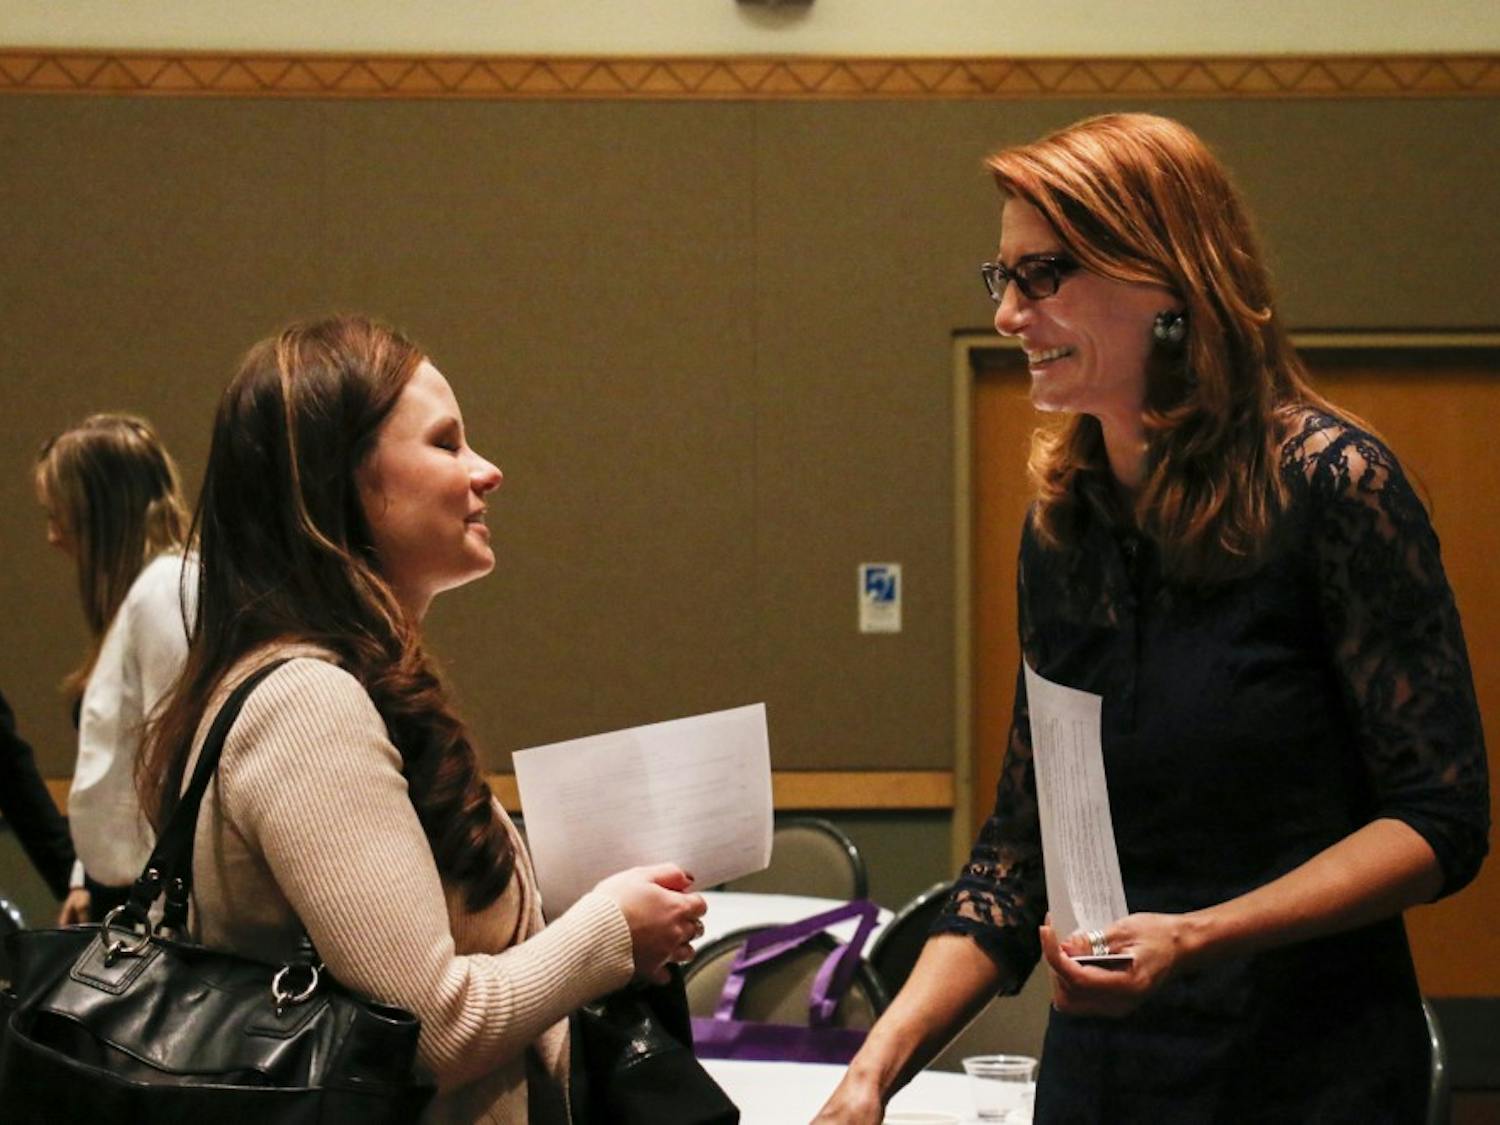 Jennifer Knowlton (right) talks to a student after the Woman in Power event Wed. 27, 2016 in the SUB Ballroom. Students got the opportunity to ask one on one question to organization leaders.